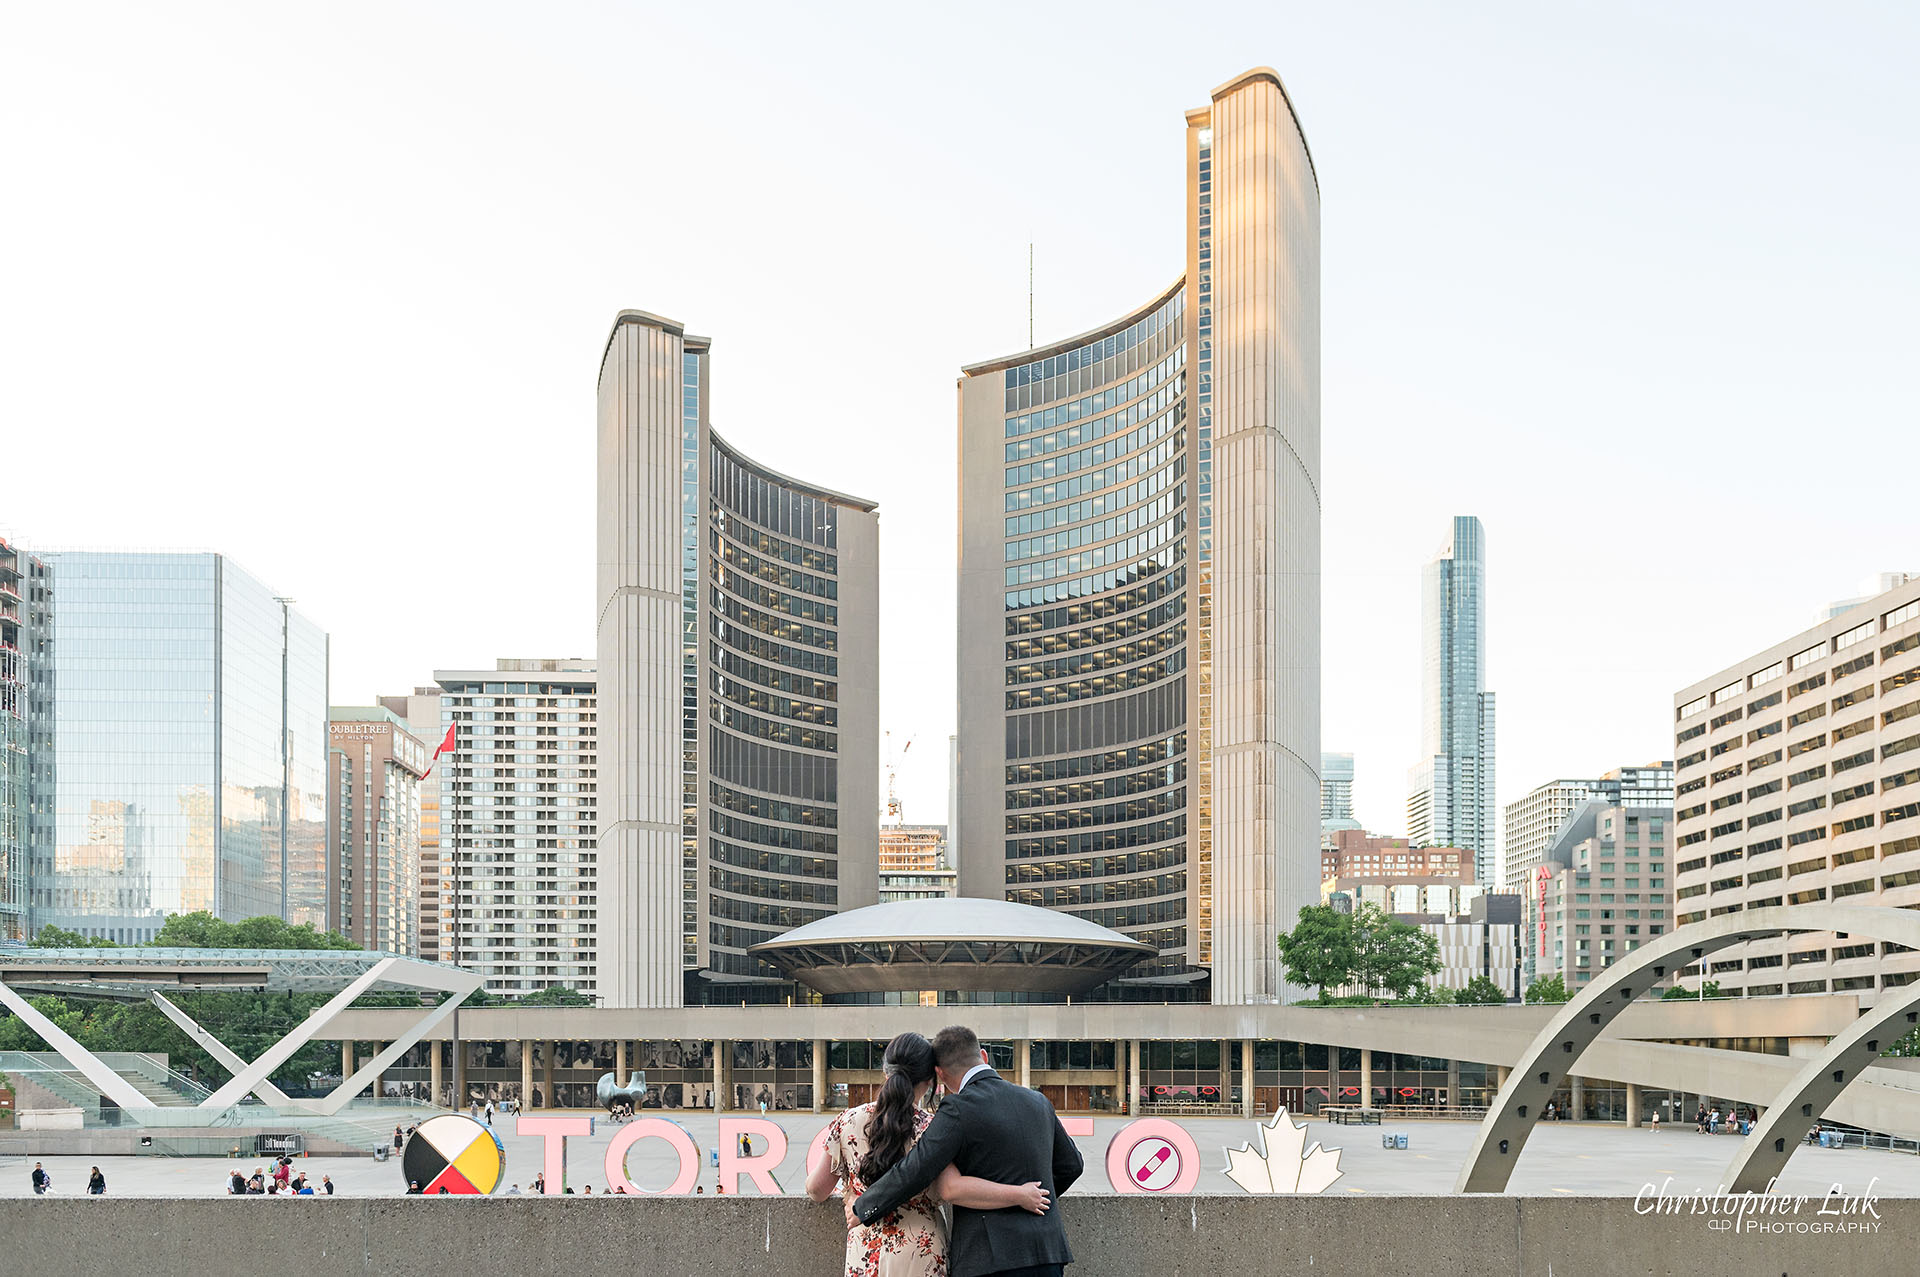 Christopher Luk Toronto Wedding Photographer Engagement Photos Pictures Session Osgoode Hall Nathan Philips Square City Hall Waterfall 3D Sign Bride Groom Hug Sunset Landscape